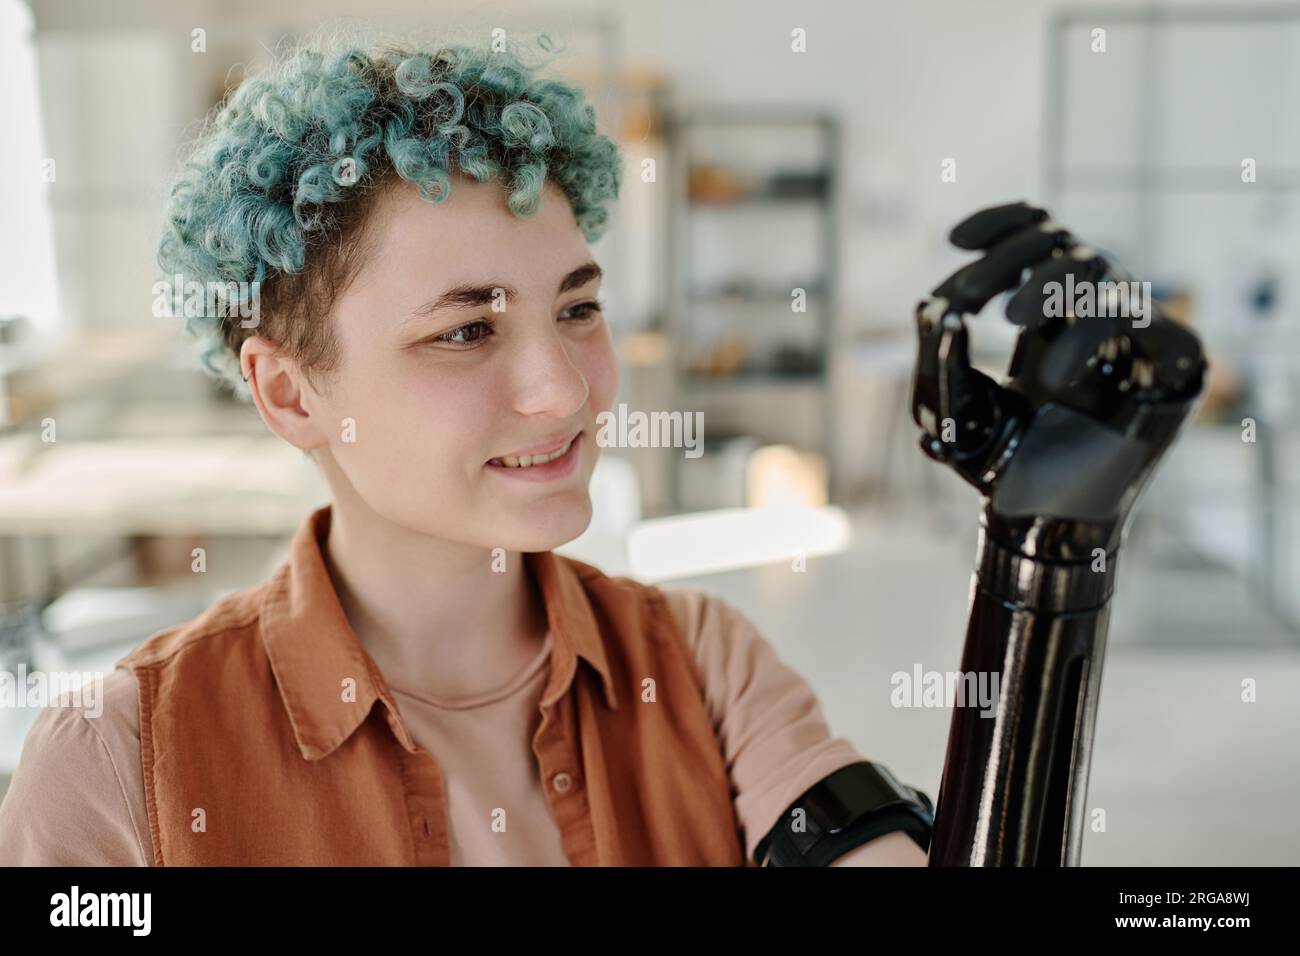 Portrait of young woman looking at cyber prosthetic arm and smiling Stock Photo